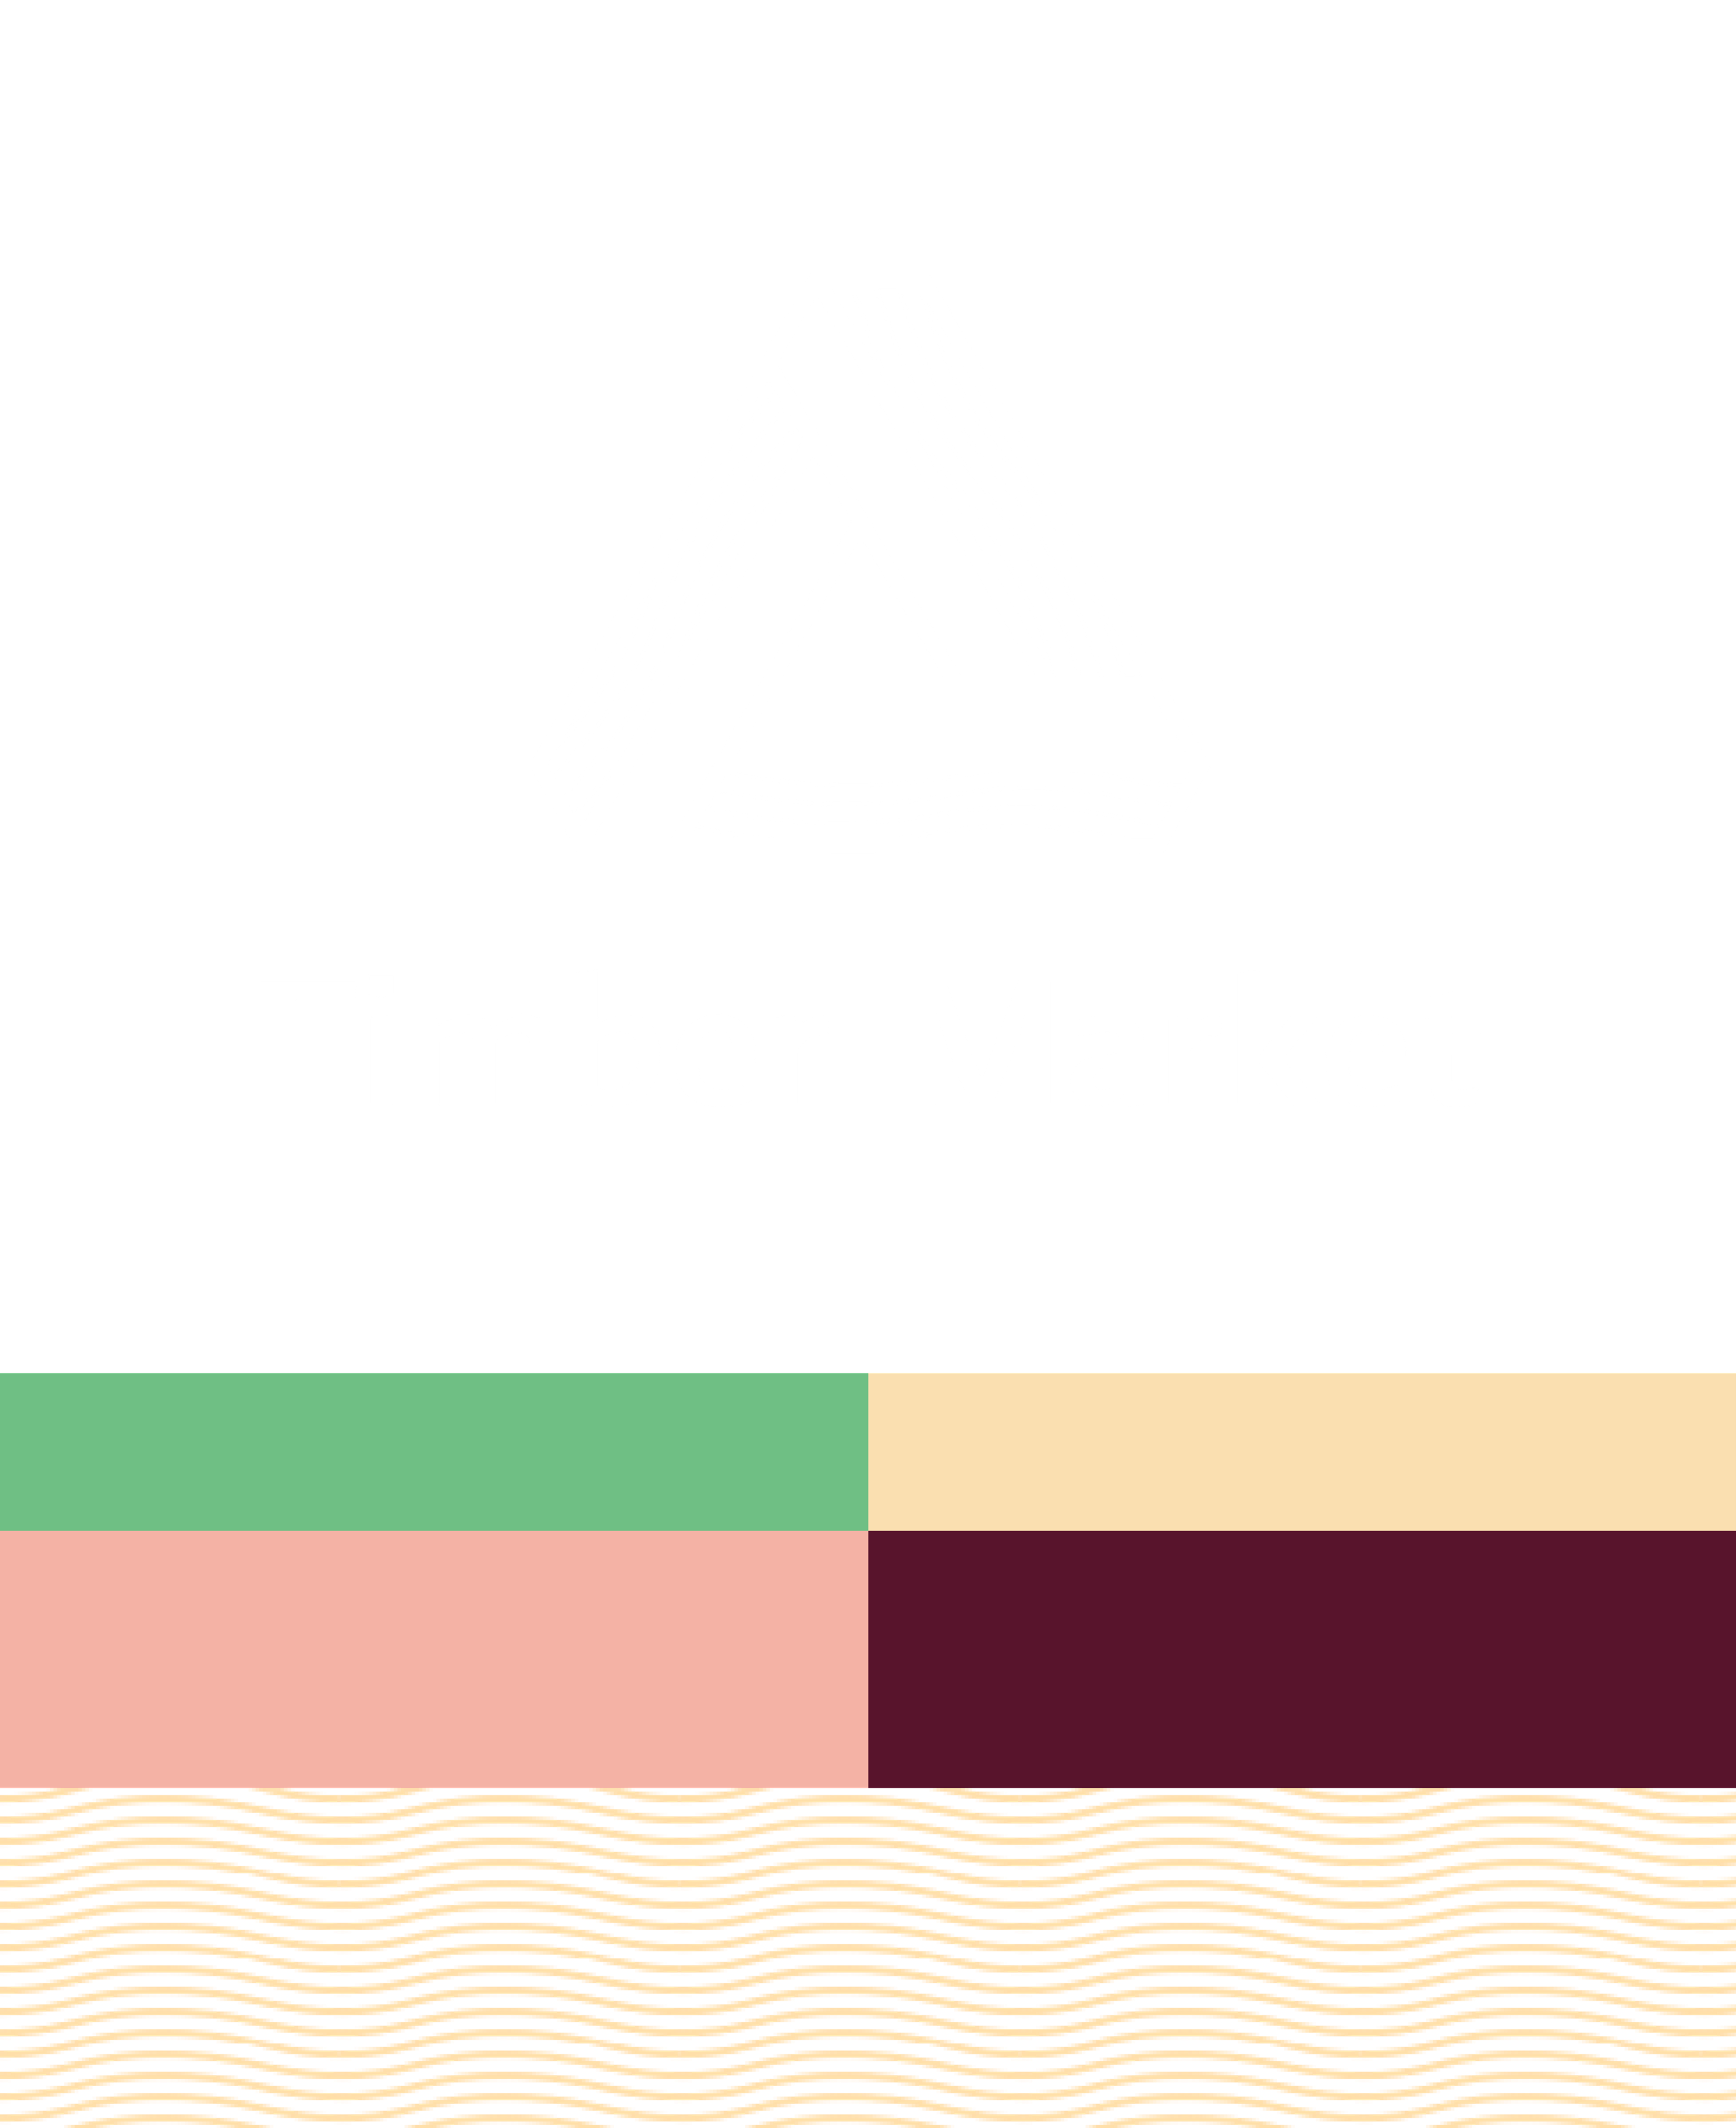 Timber Market brand elements designed by Function & Form